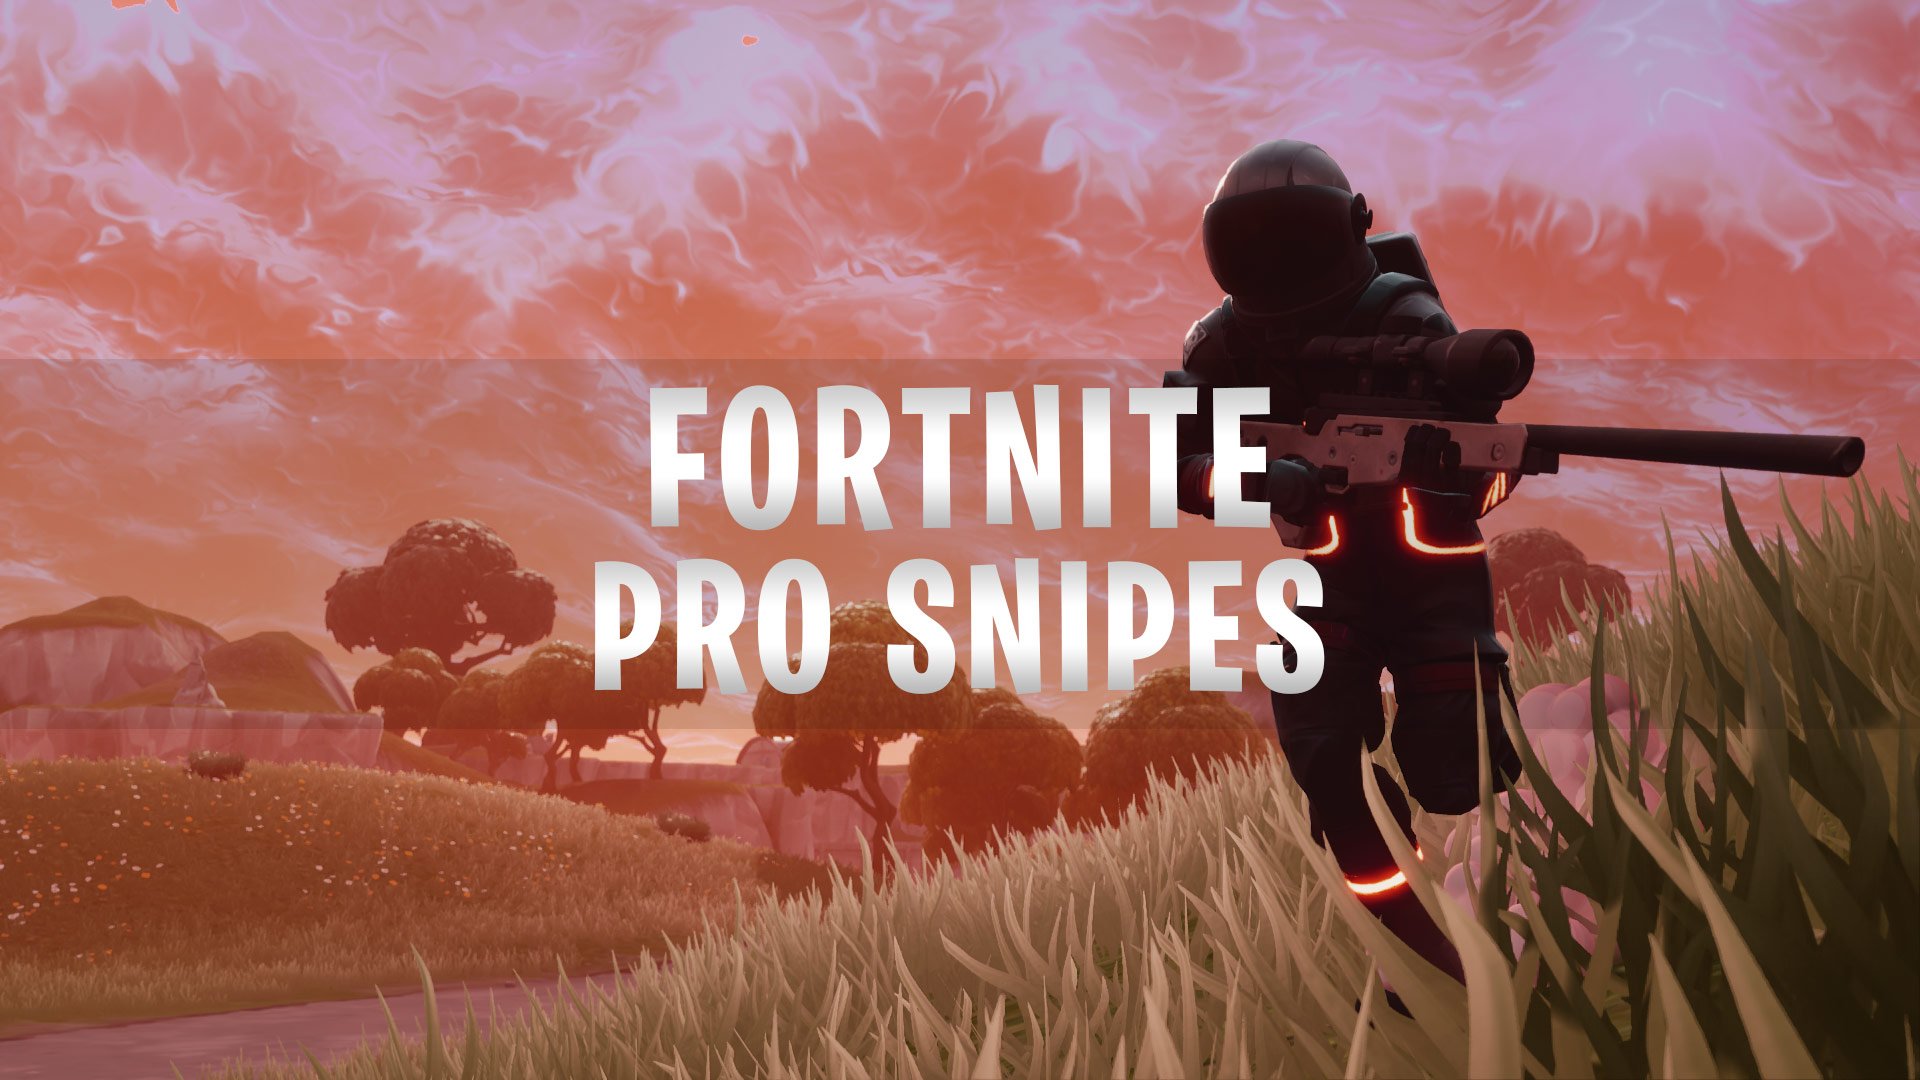 Solo Snipes Fortnite Discord Fortnite Pro Snipes Solo Duo Squad What Is It And How To Join